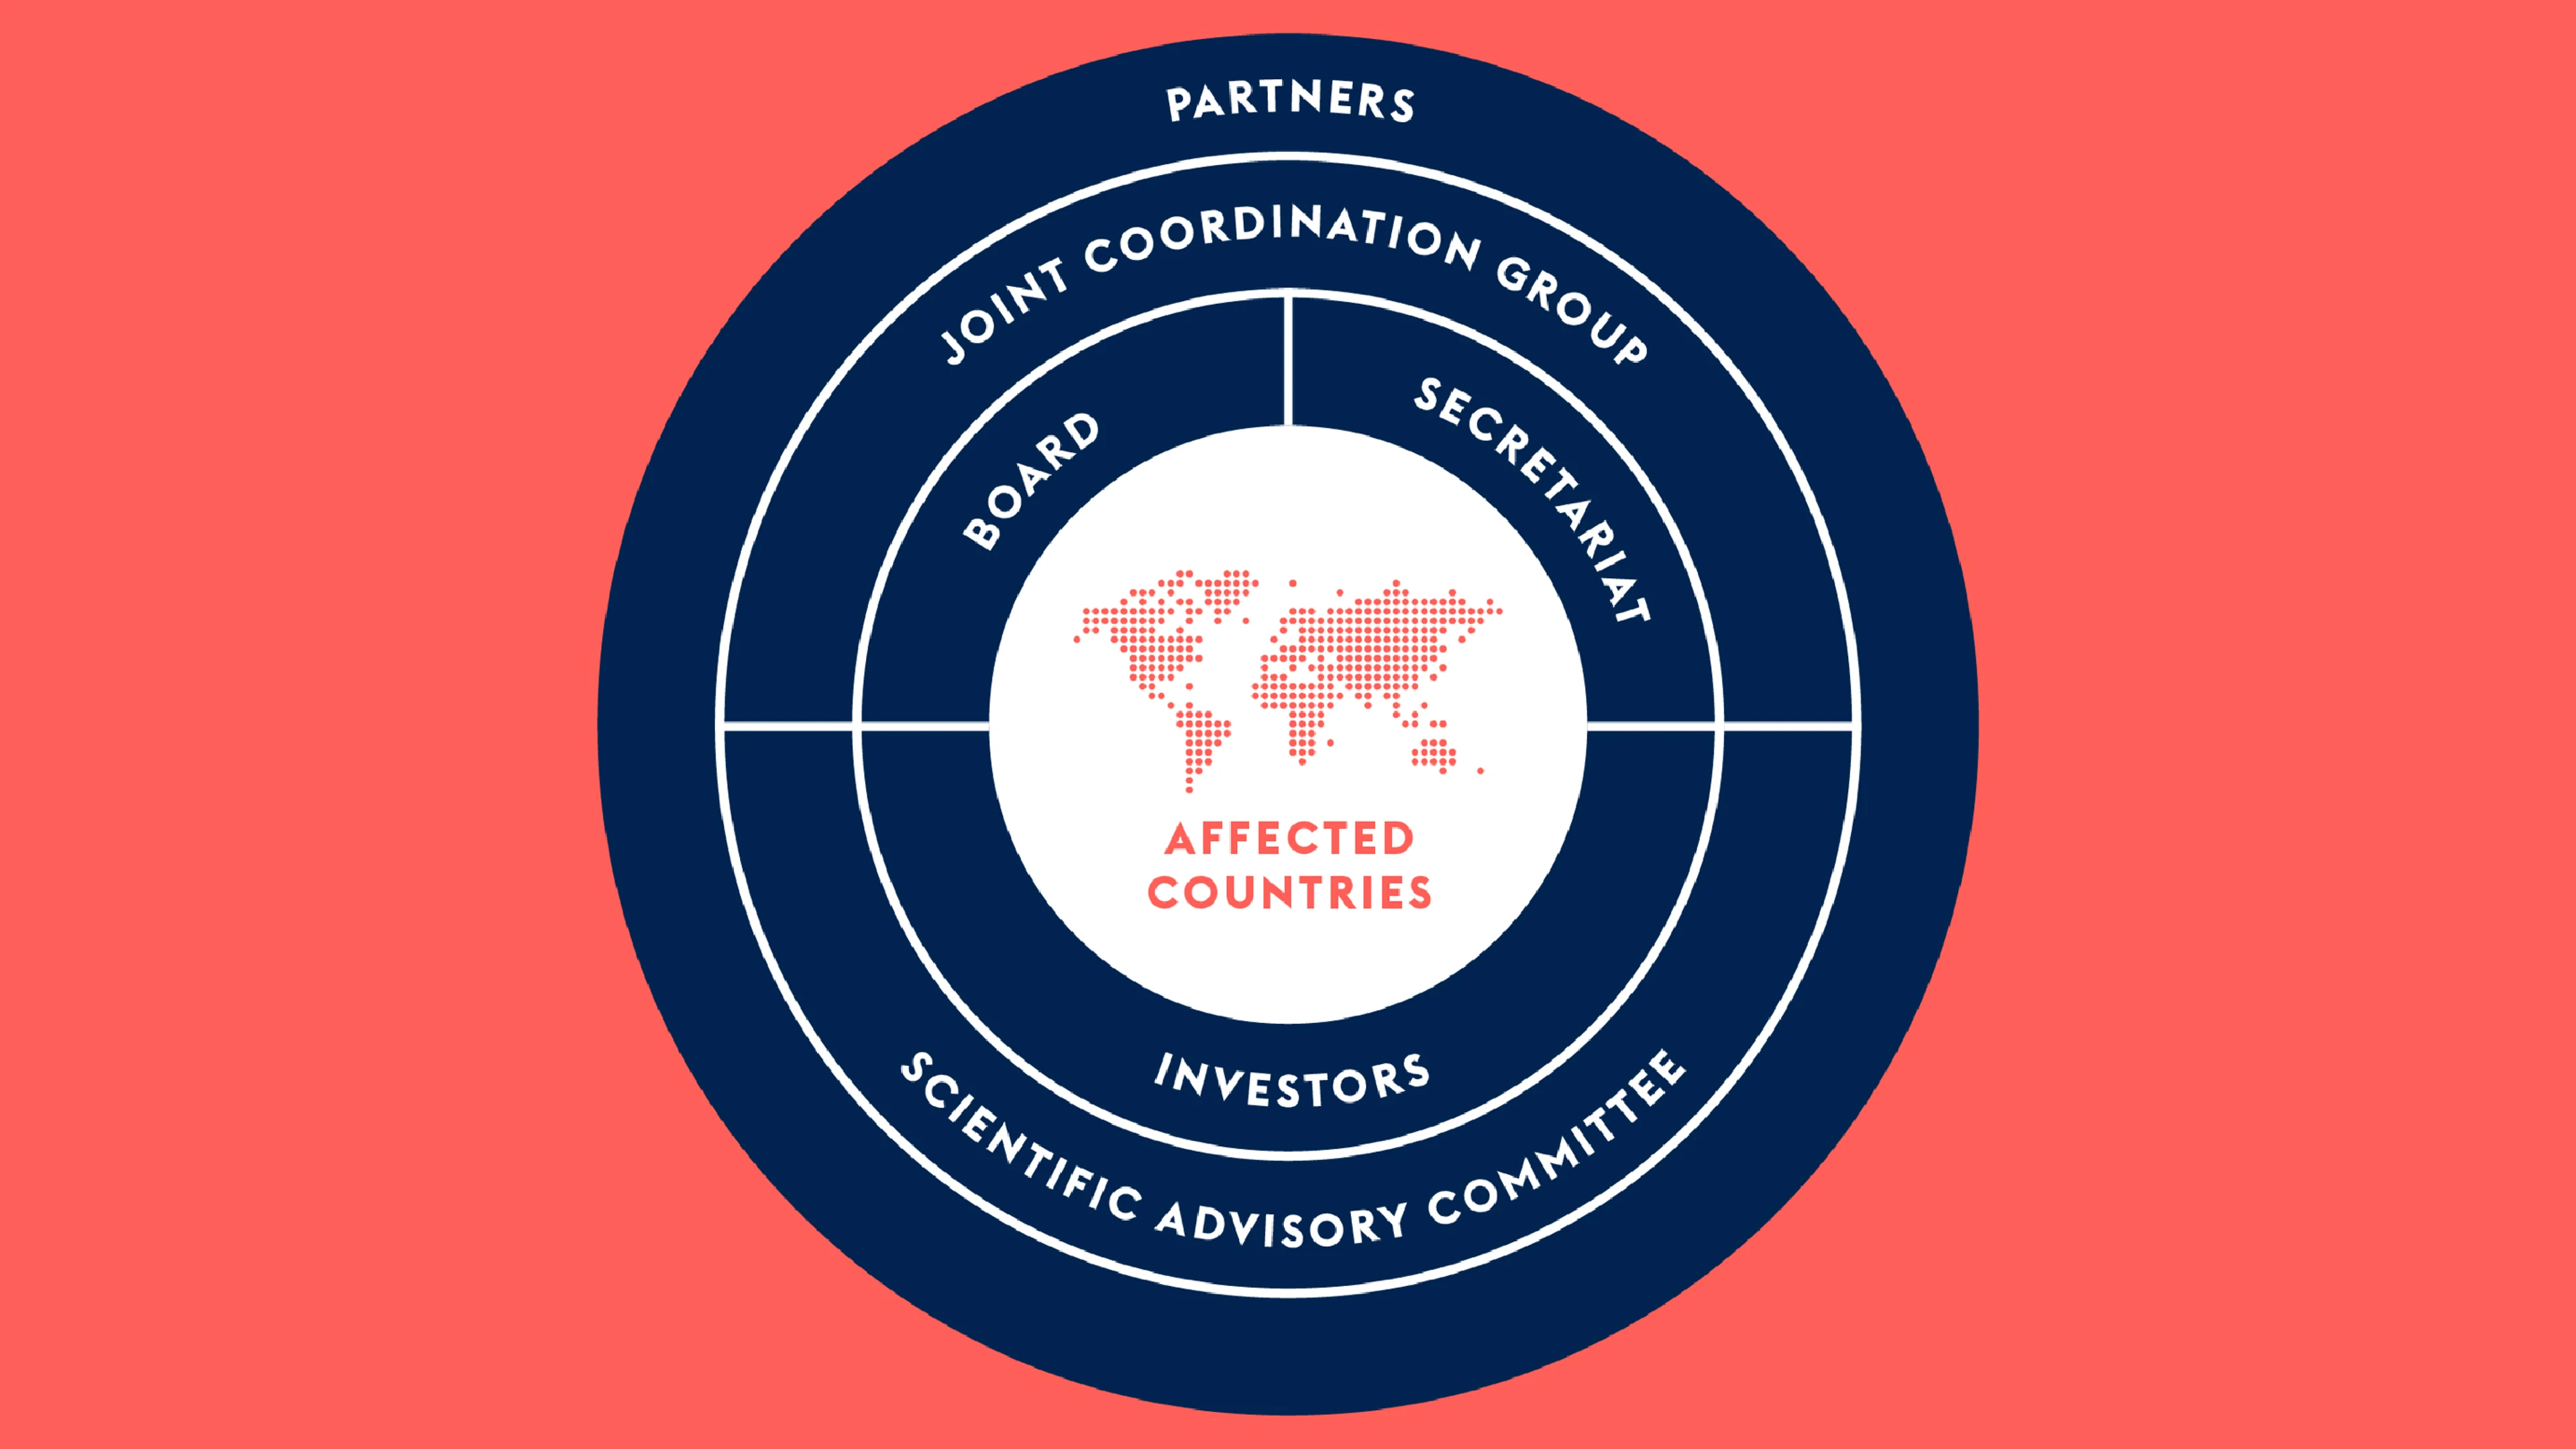 circular diagram showing different stakeholders in CEPI's coalition